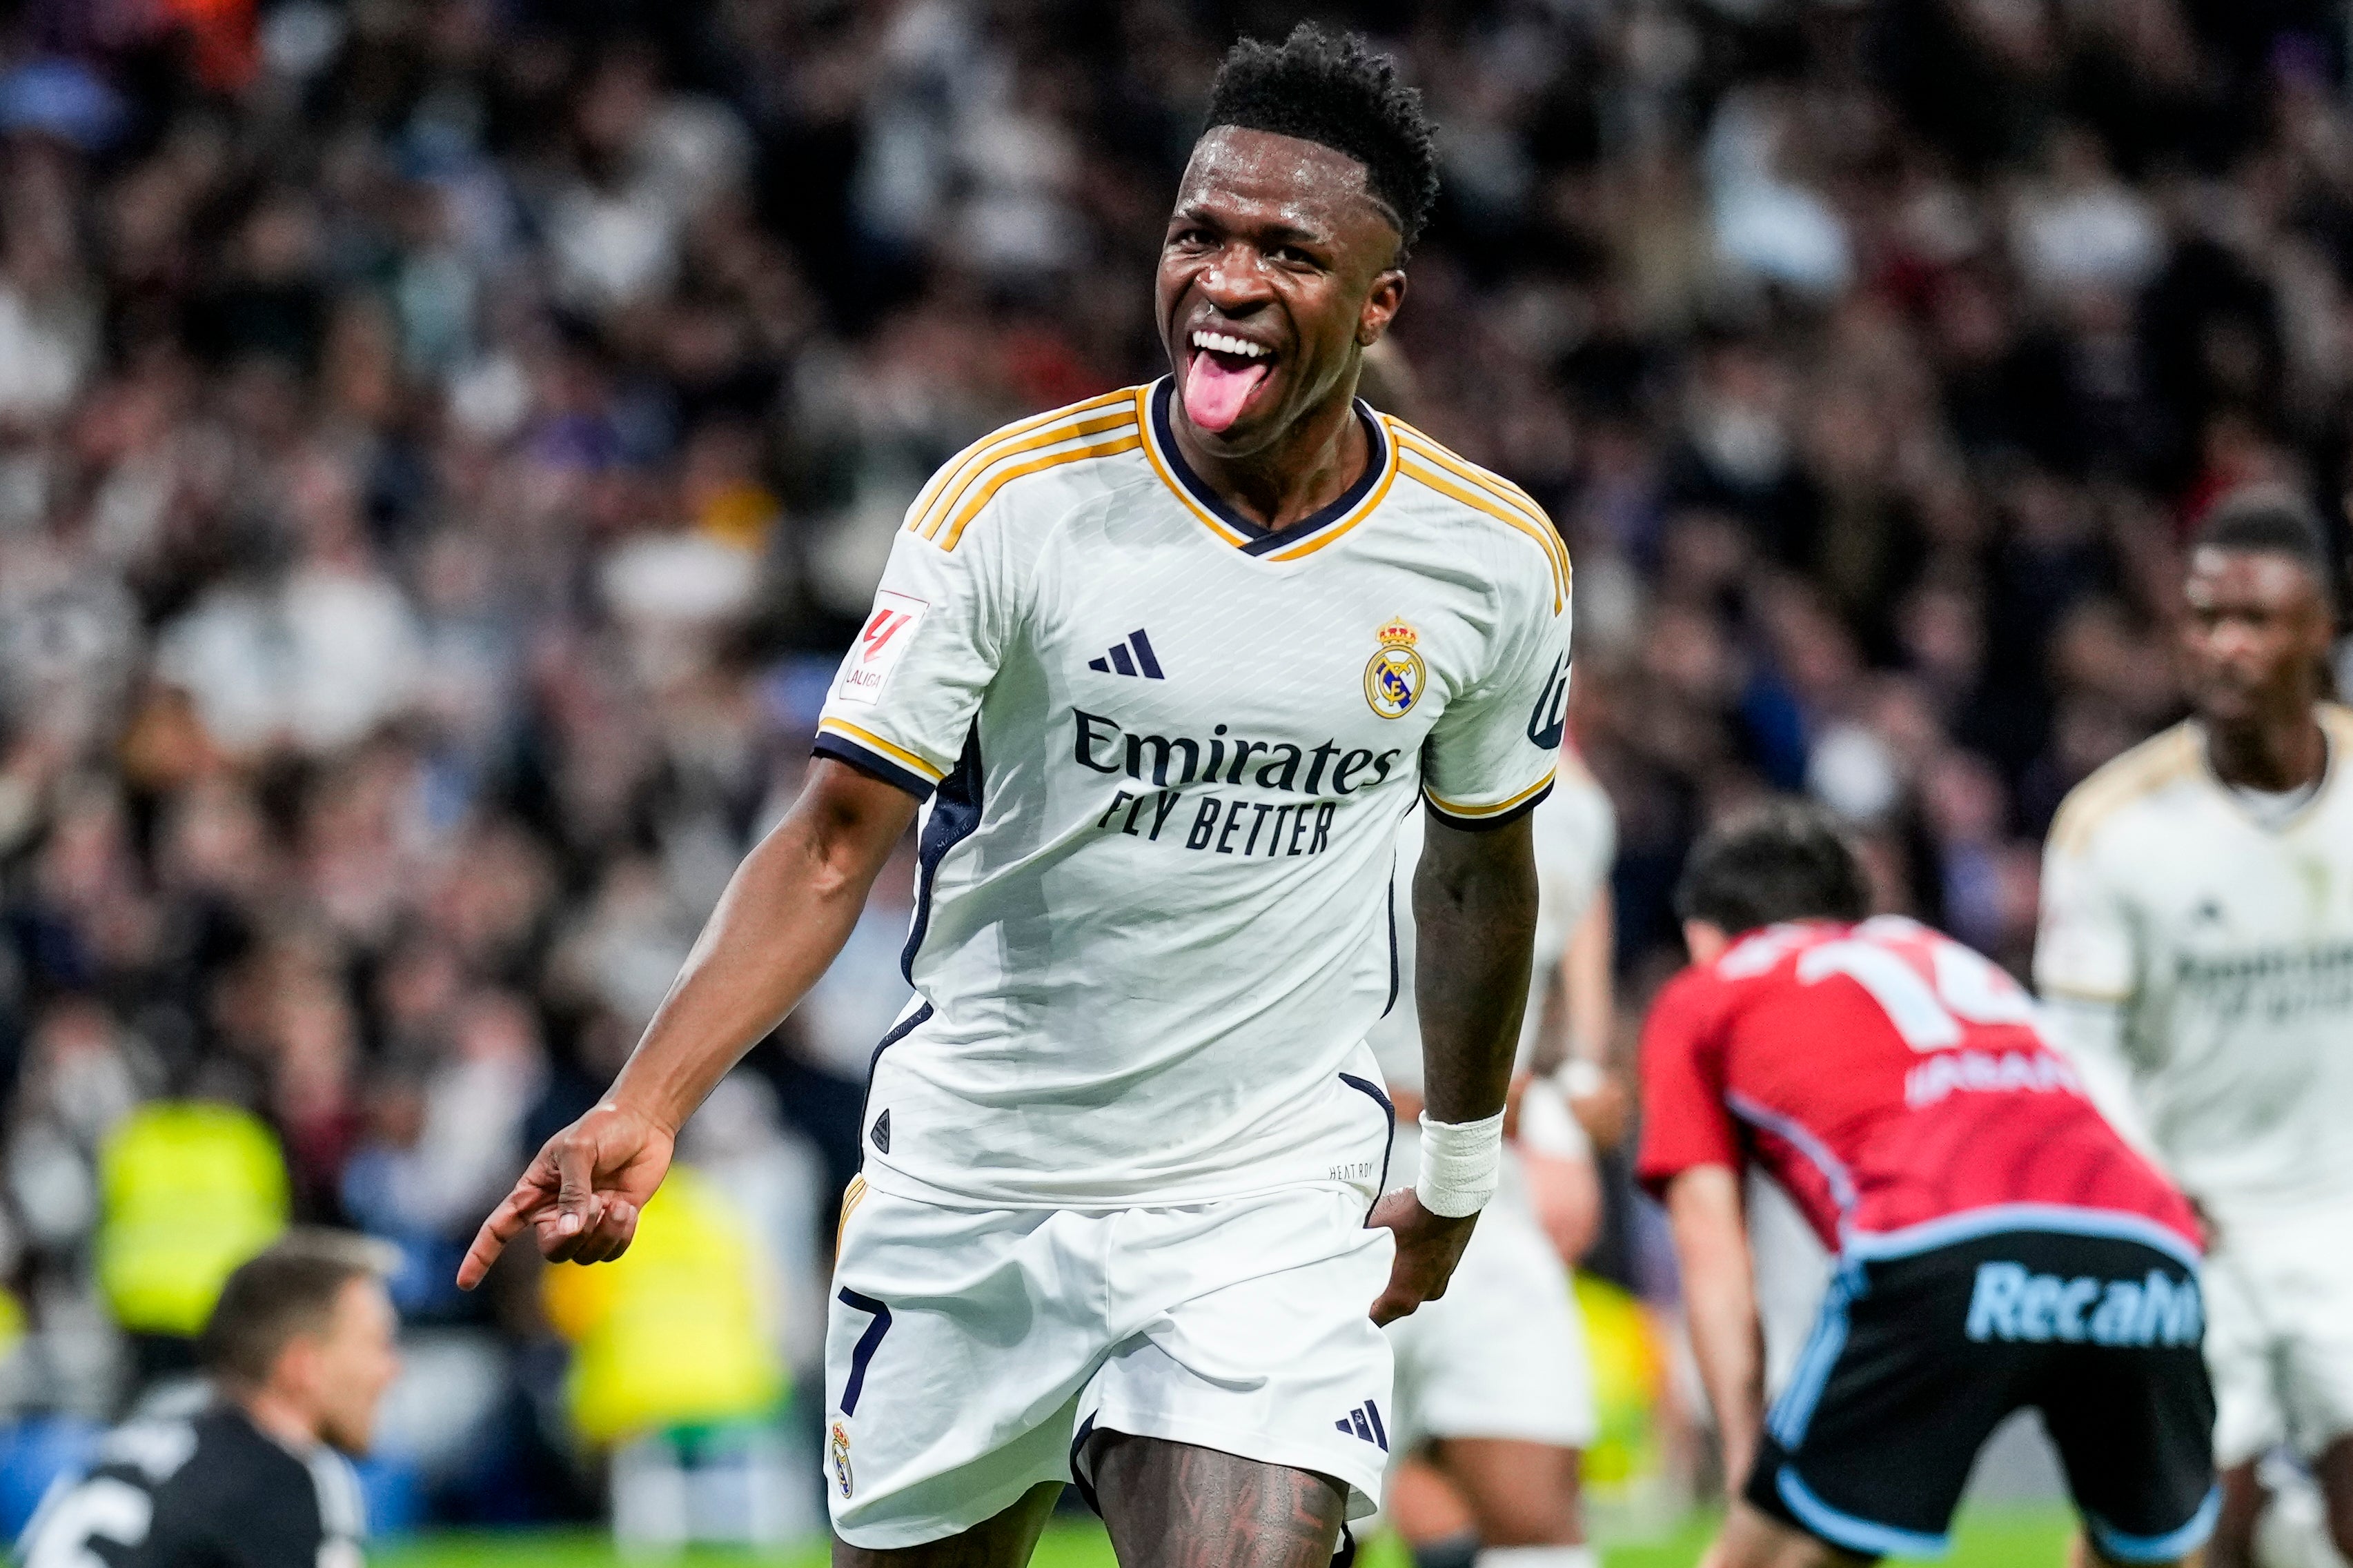 Vinicius Jr, 23, is thriving at Real Madrid